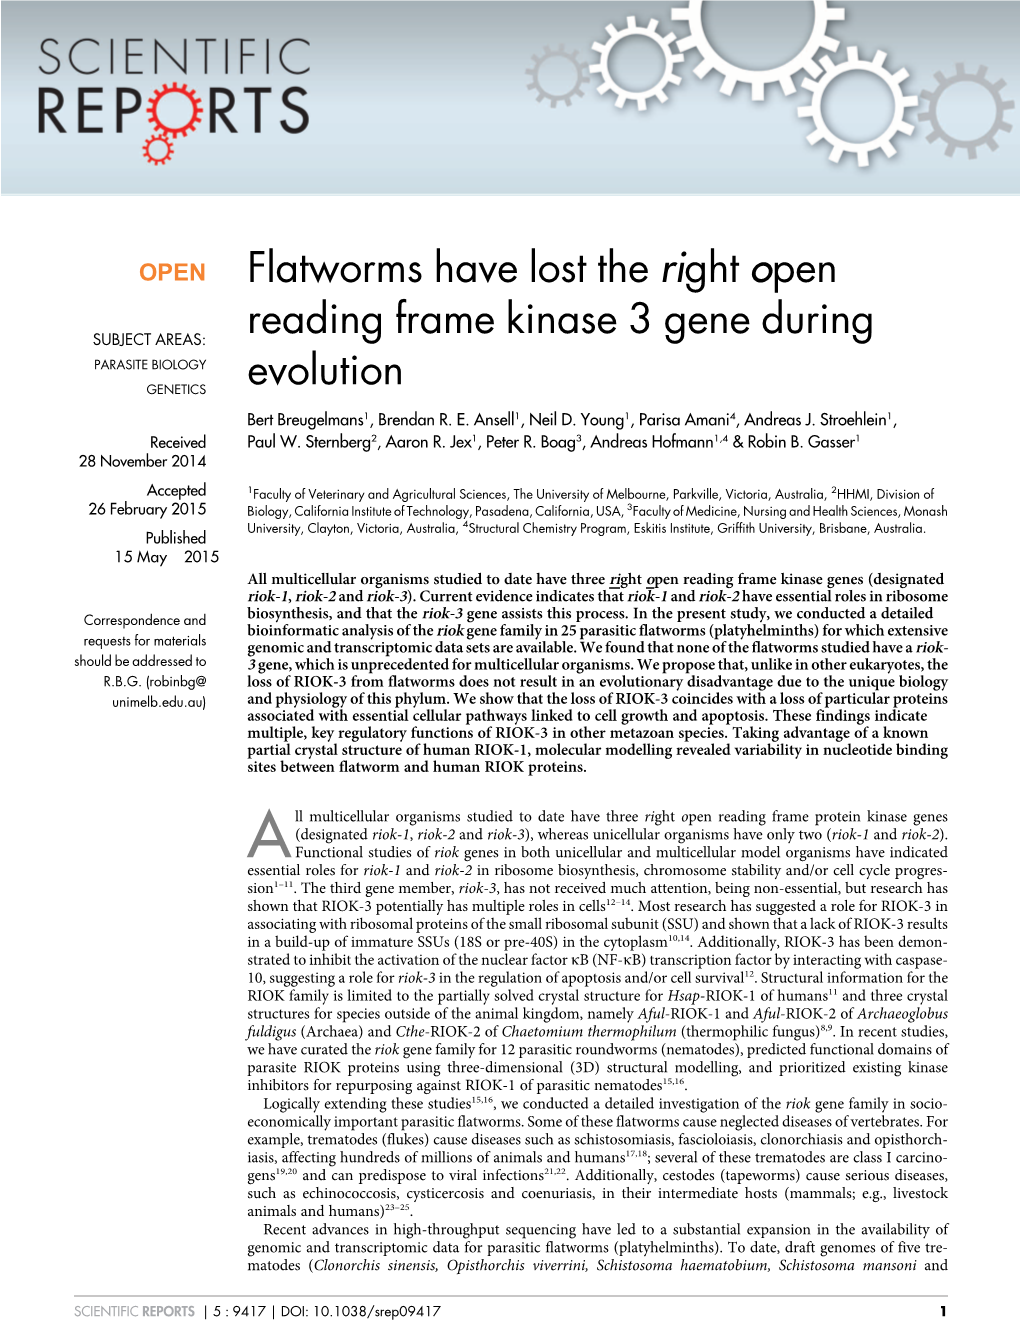 Flatworms Have Lost the Right Open Reading Frame